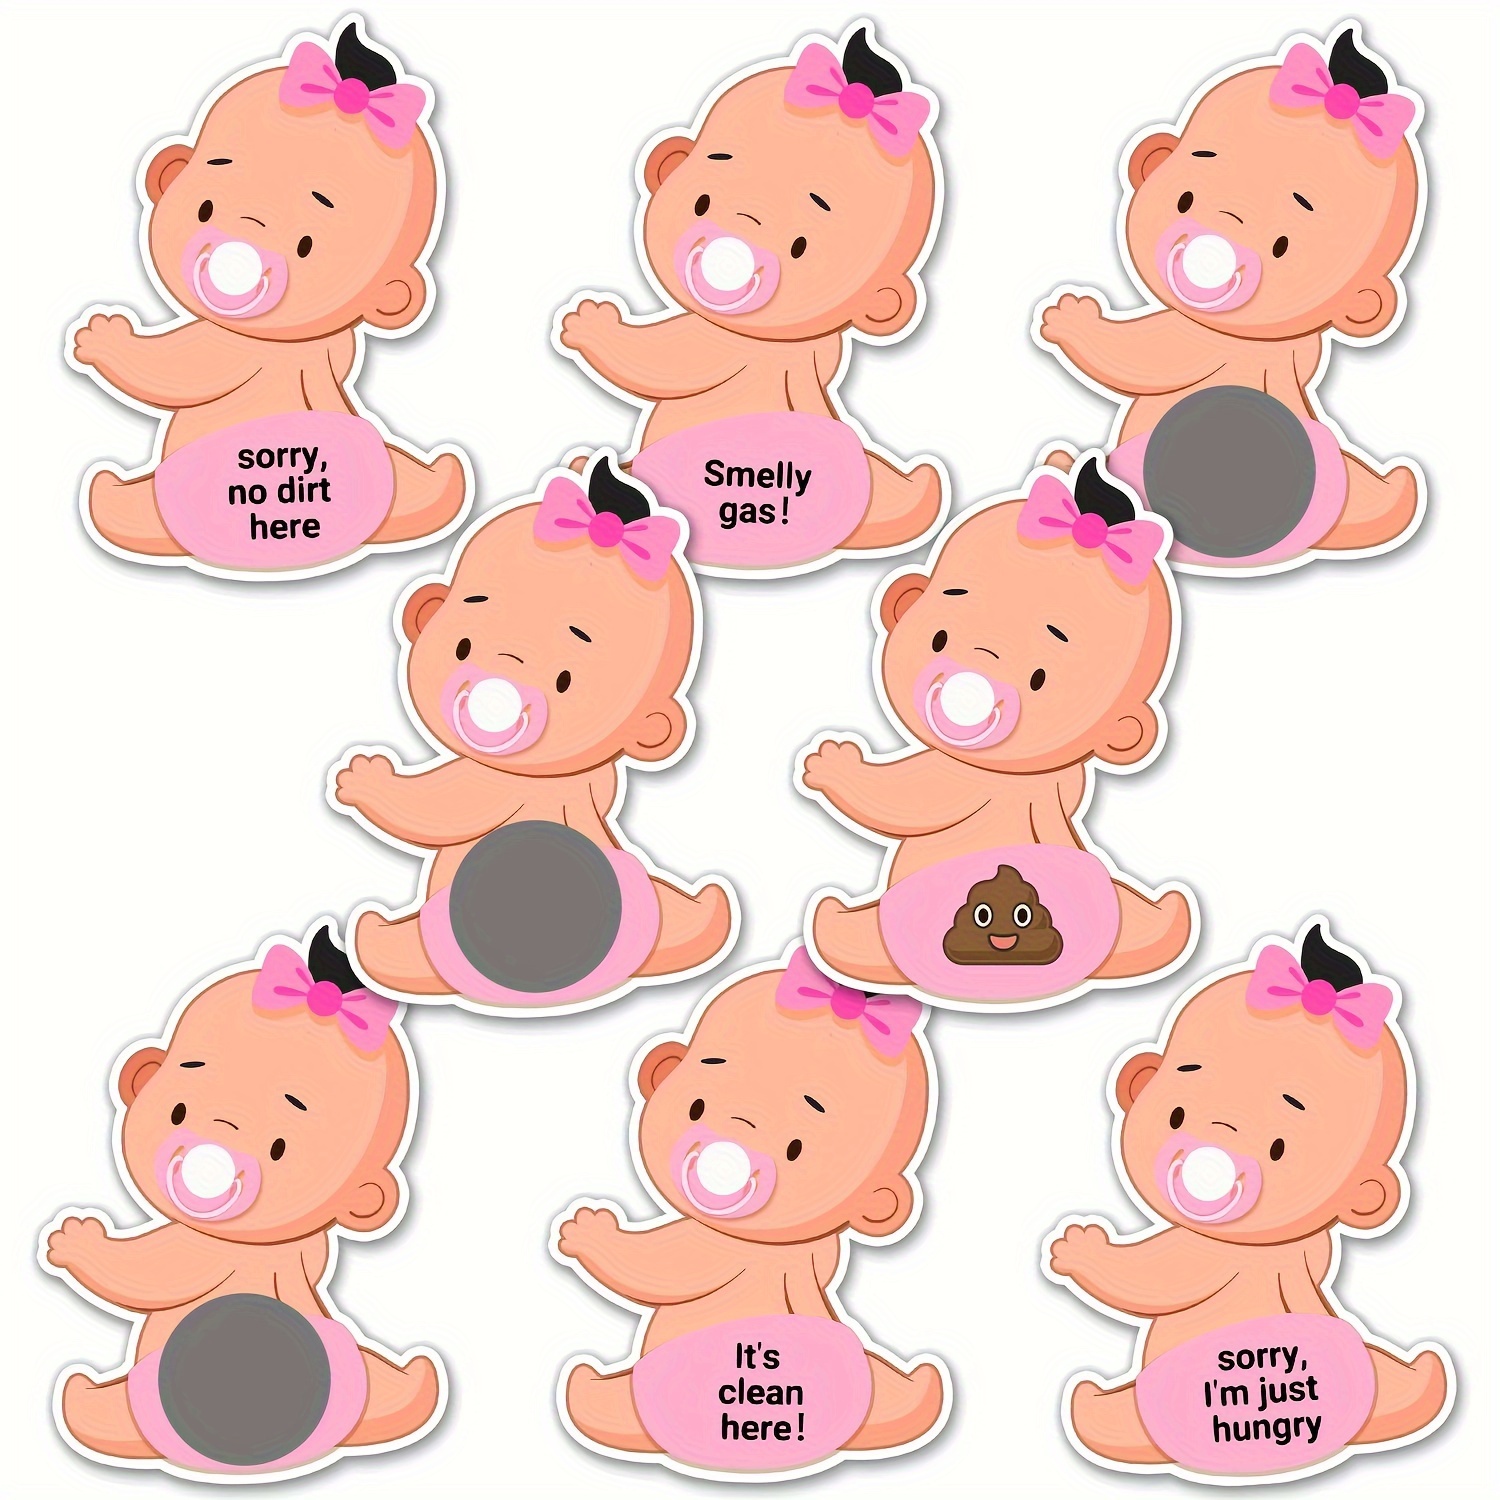 

Baby Shower Scratch Off Stickers: Ice Breaker Silly Activities, Door Prizes, Fun And Easy To Play - Includes 27 Loser Cards, 33 Scratch Off Stickers, And 3 Winners